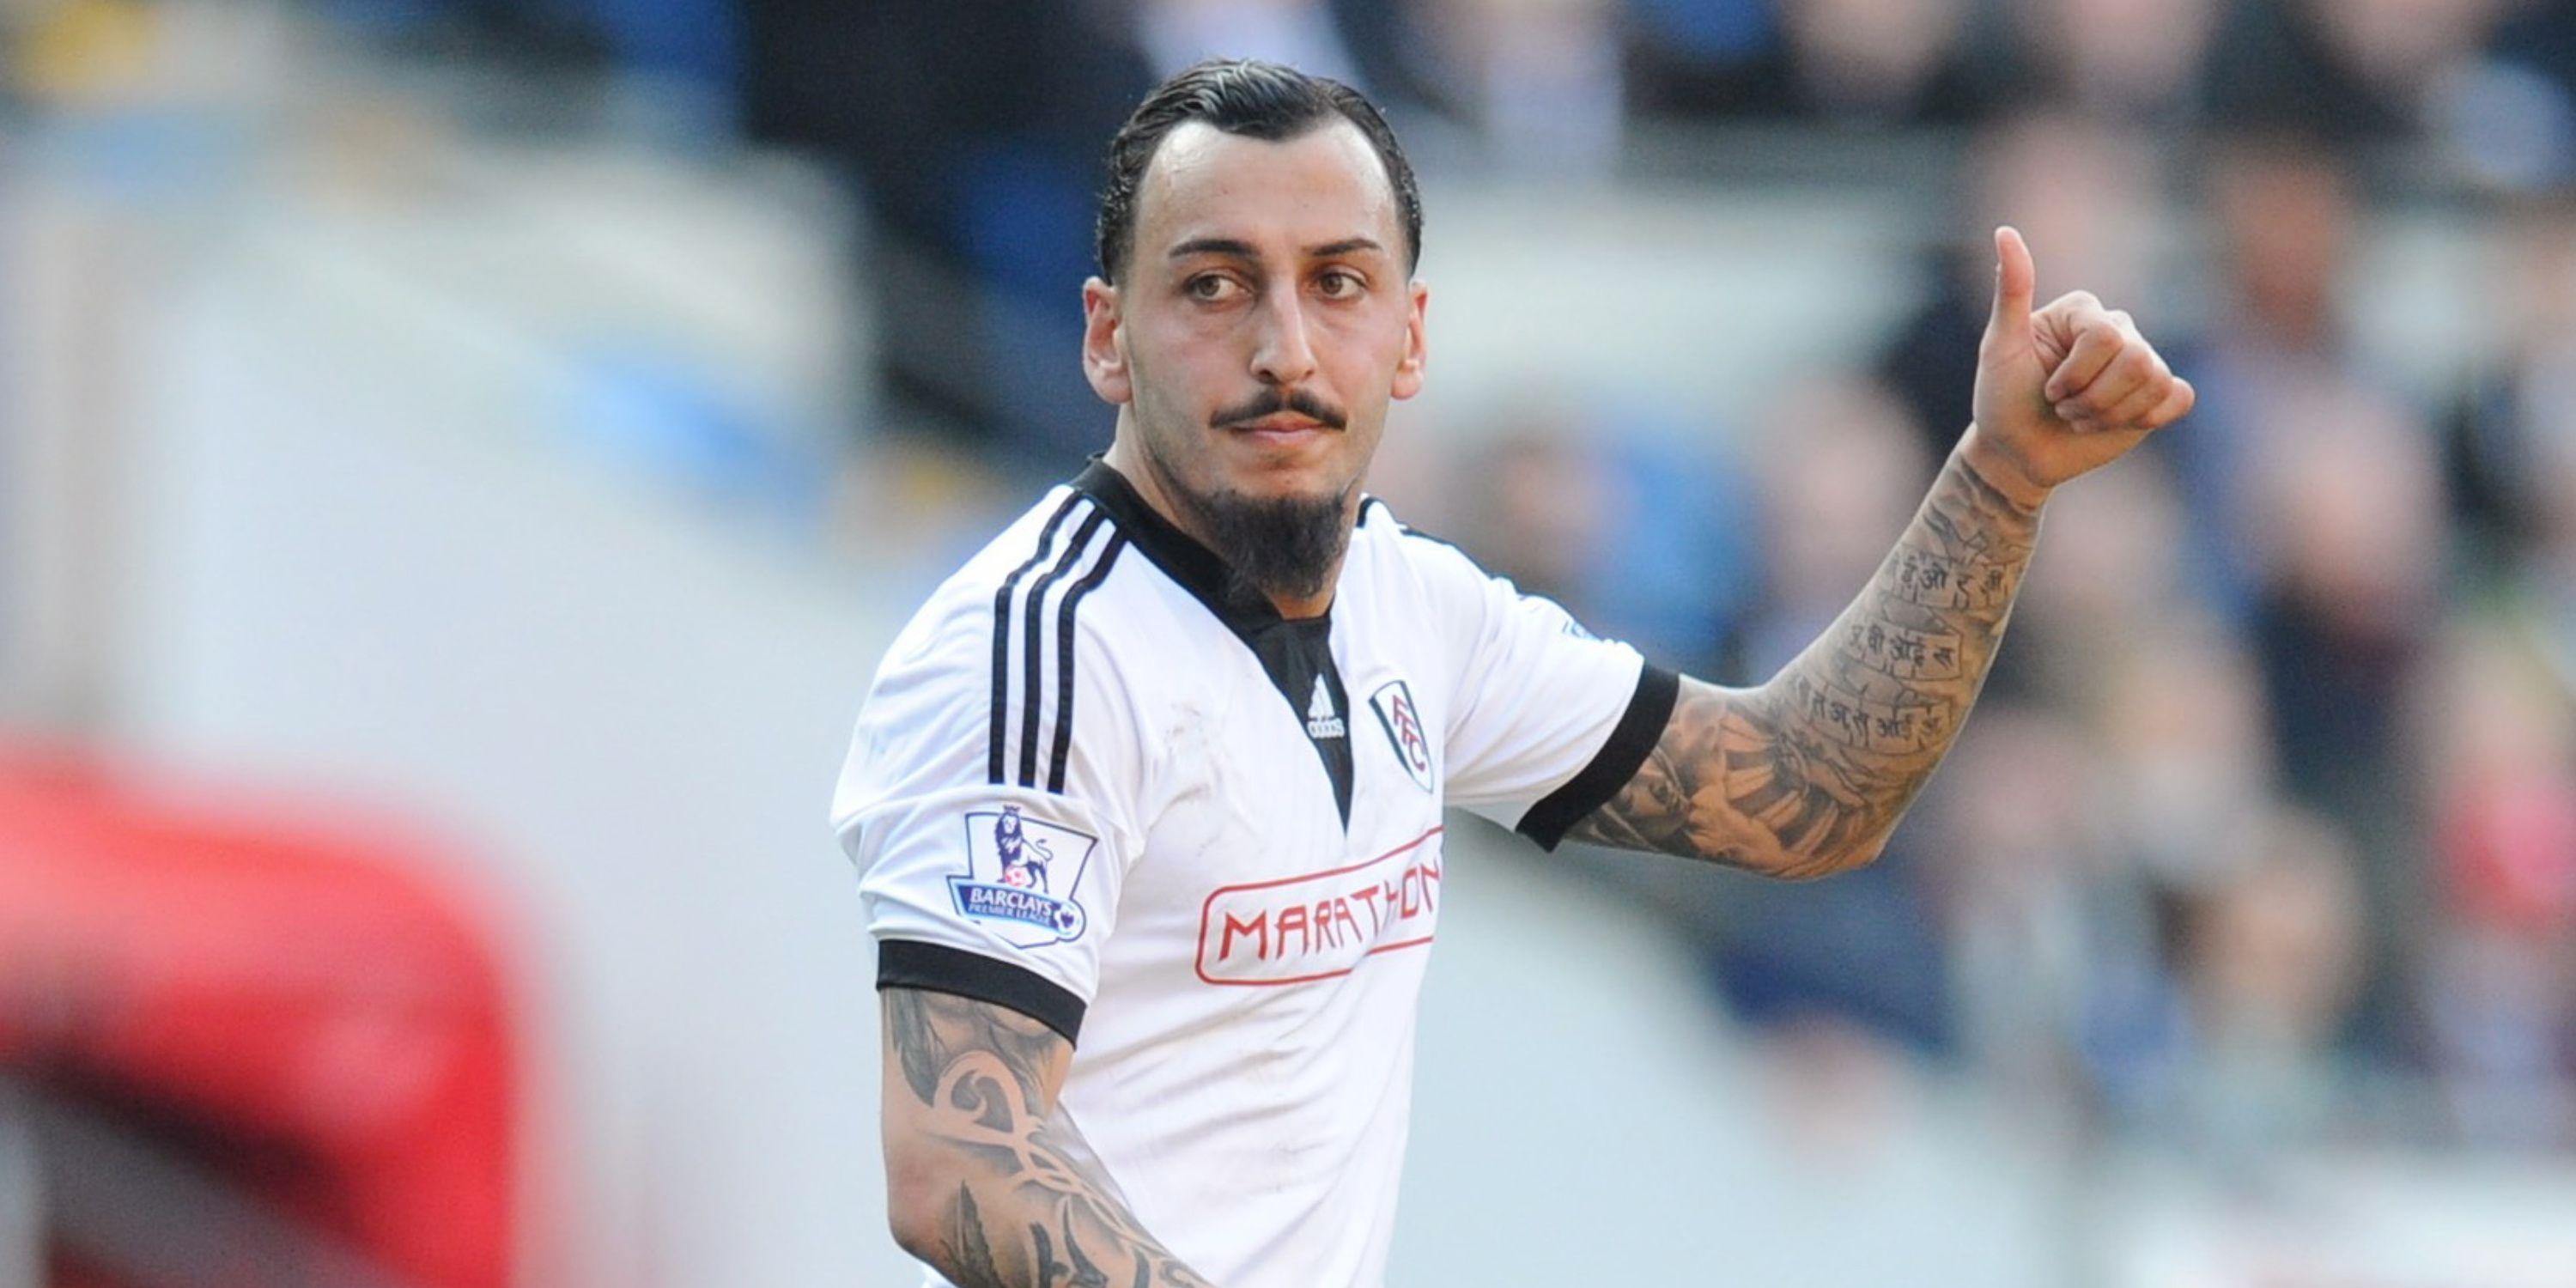 Fulham's Kostas Mitroglu giving a thumbs up